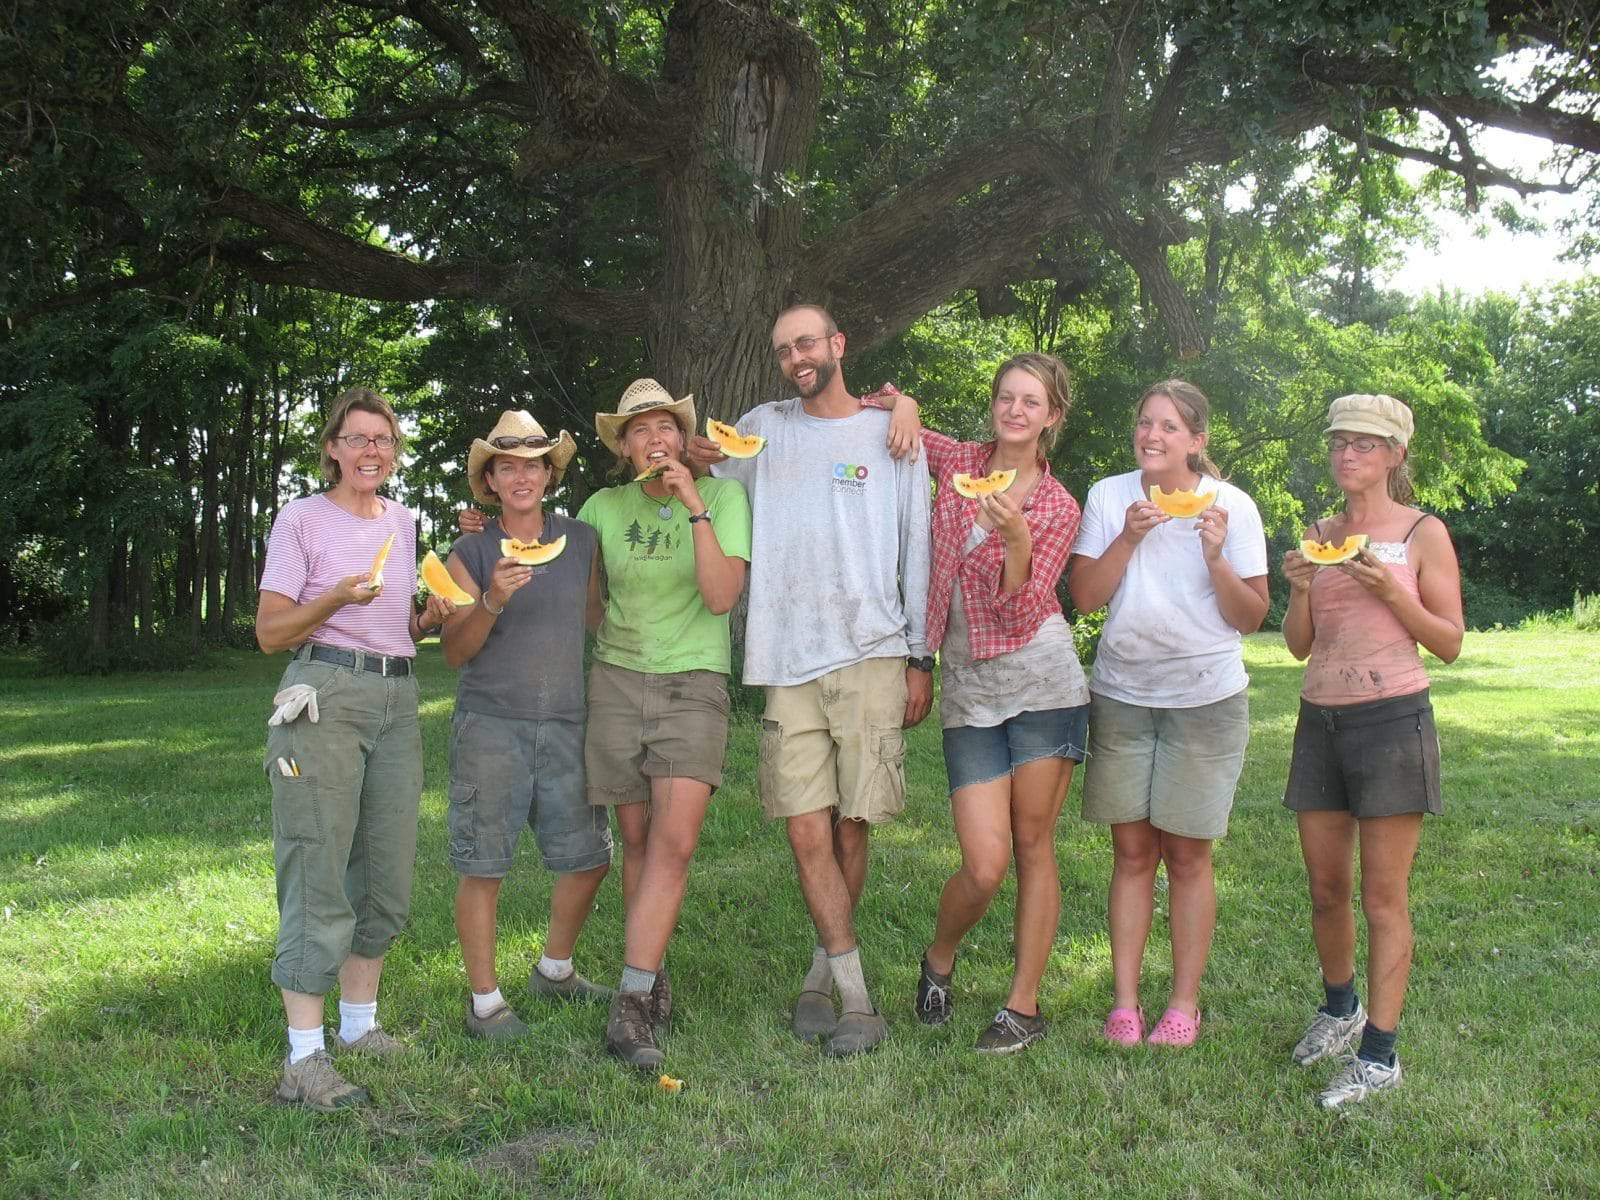 The farm crew at the Wedge owned and operated Gardens of Eagan eat watermelon under The Oak.